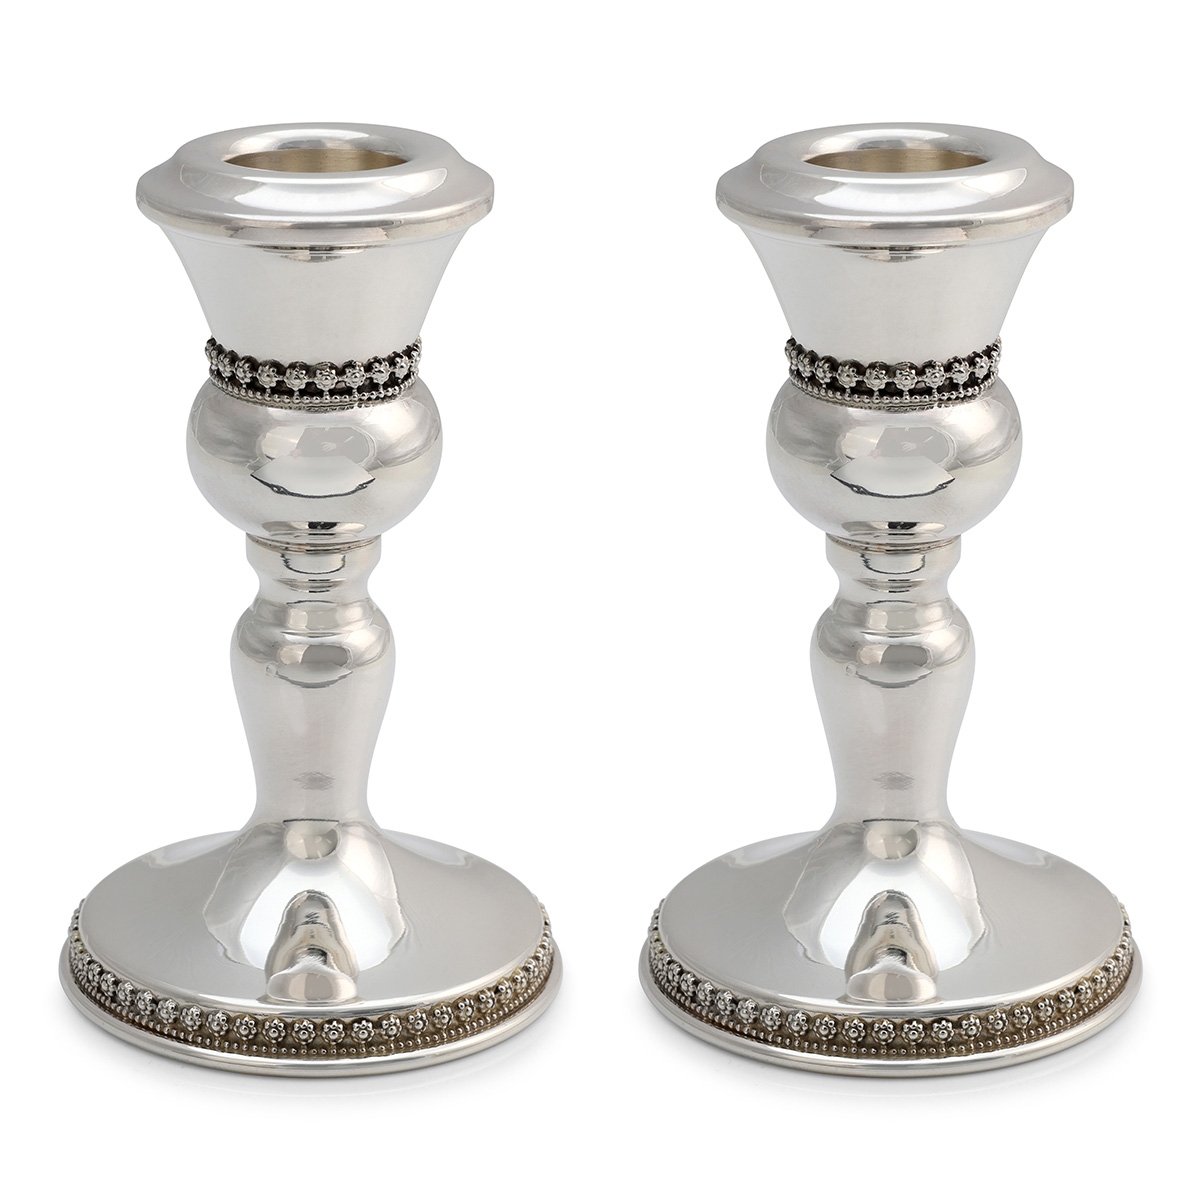 Handcrafted Sterling Silver Shabbat Candlesticks With Floral Filigree  Design By Traditional Yemenite Art, Judaica | Judaica Webstore